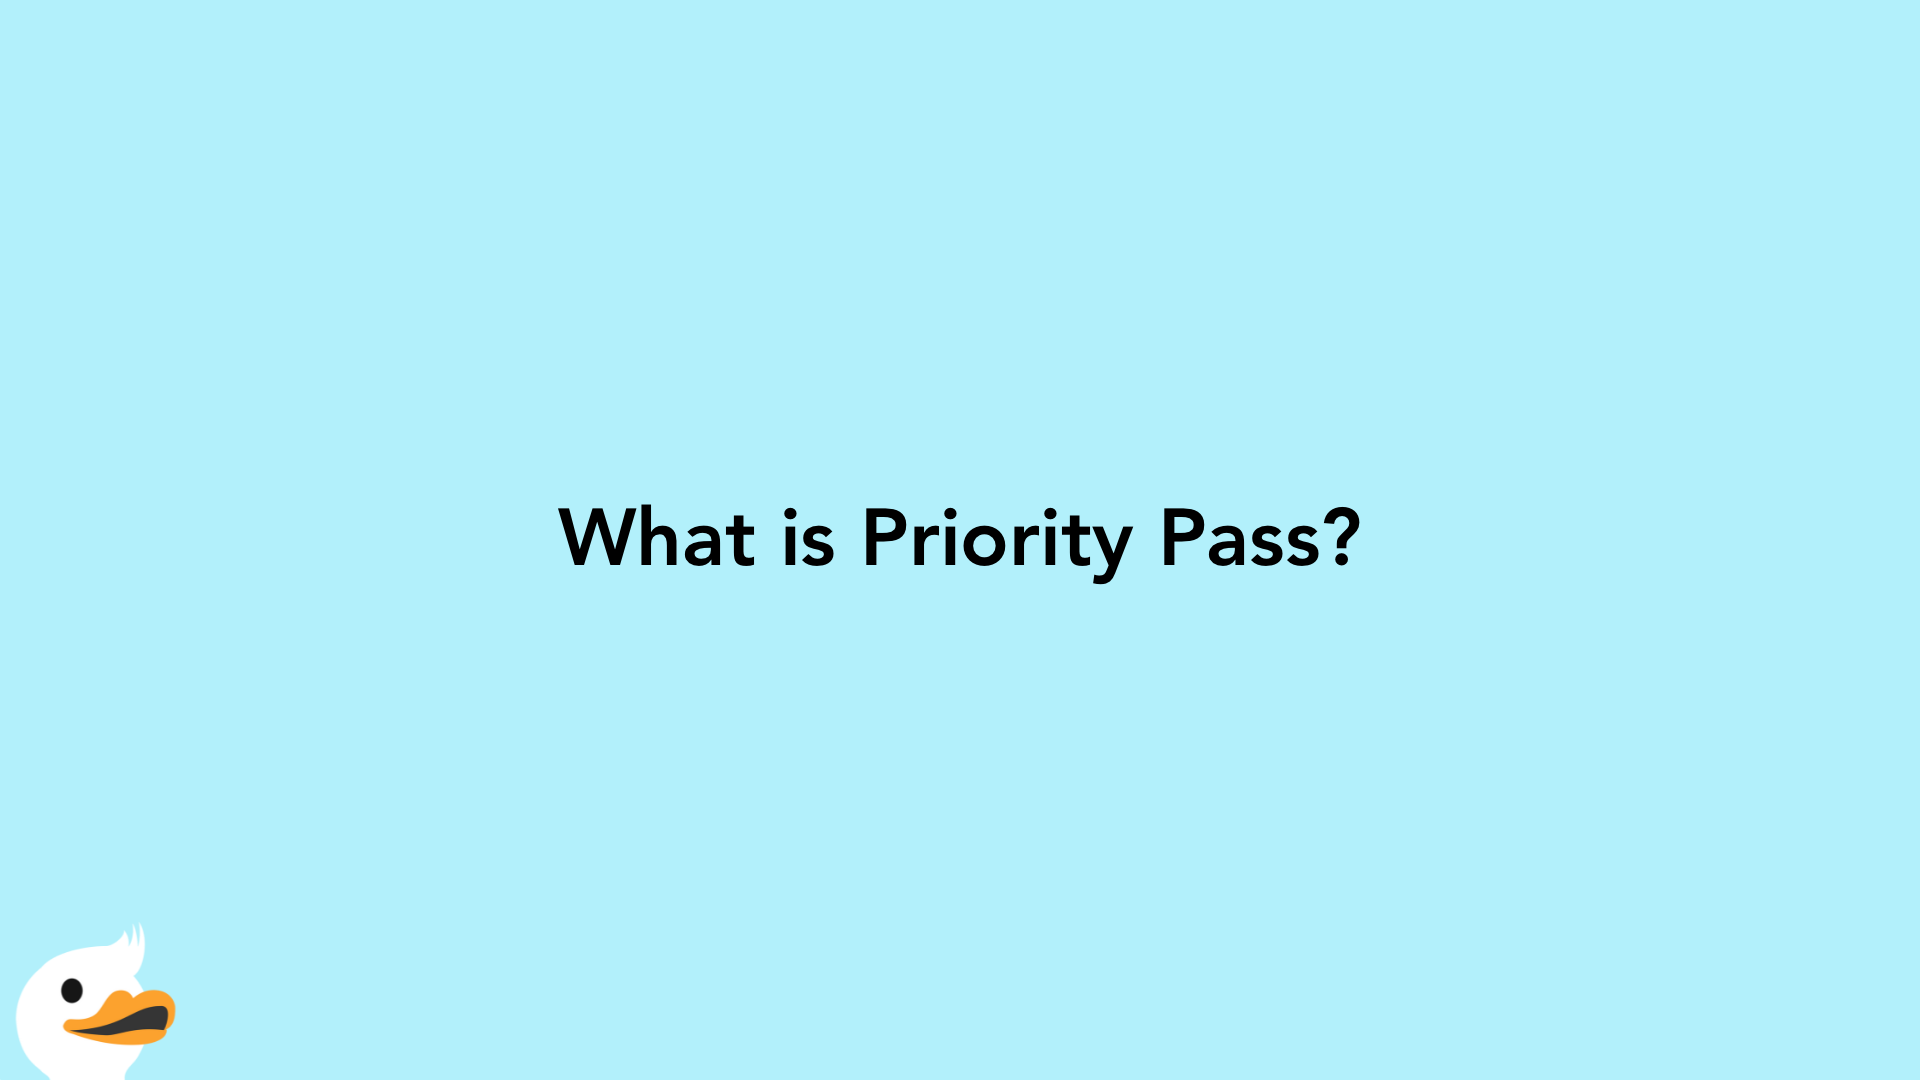 What is Priority Pass?